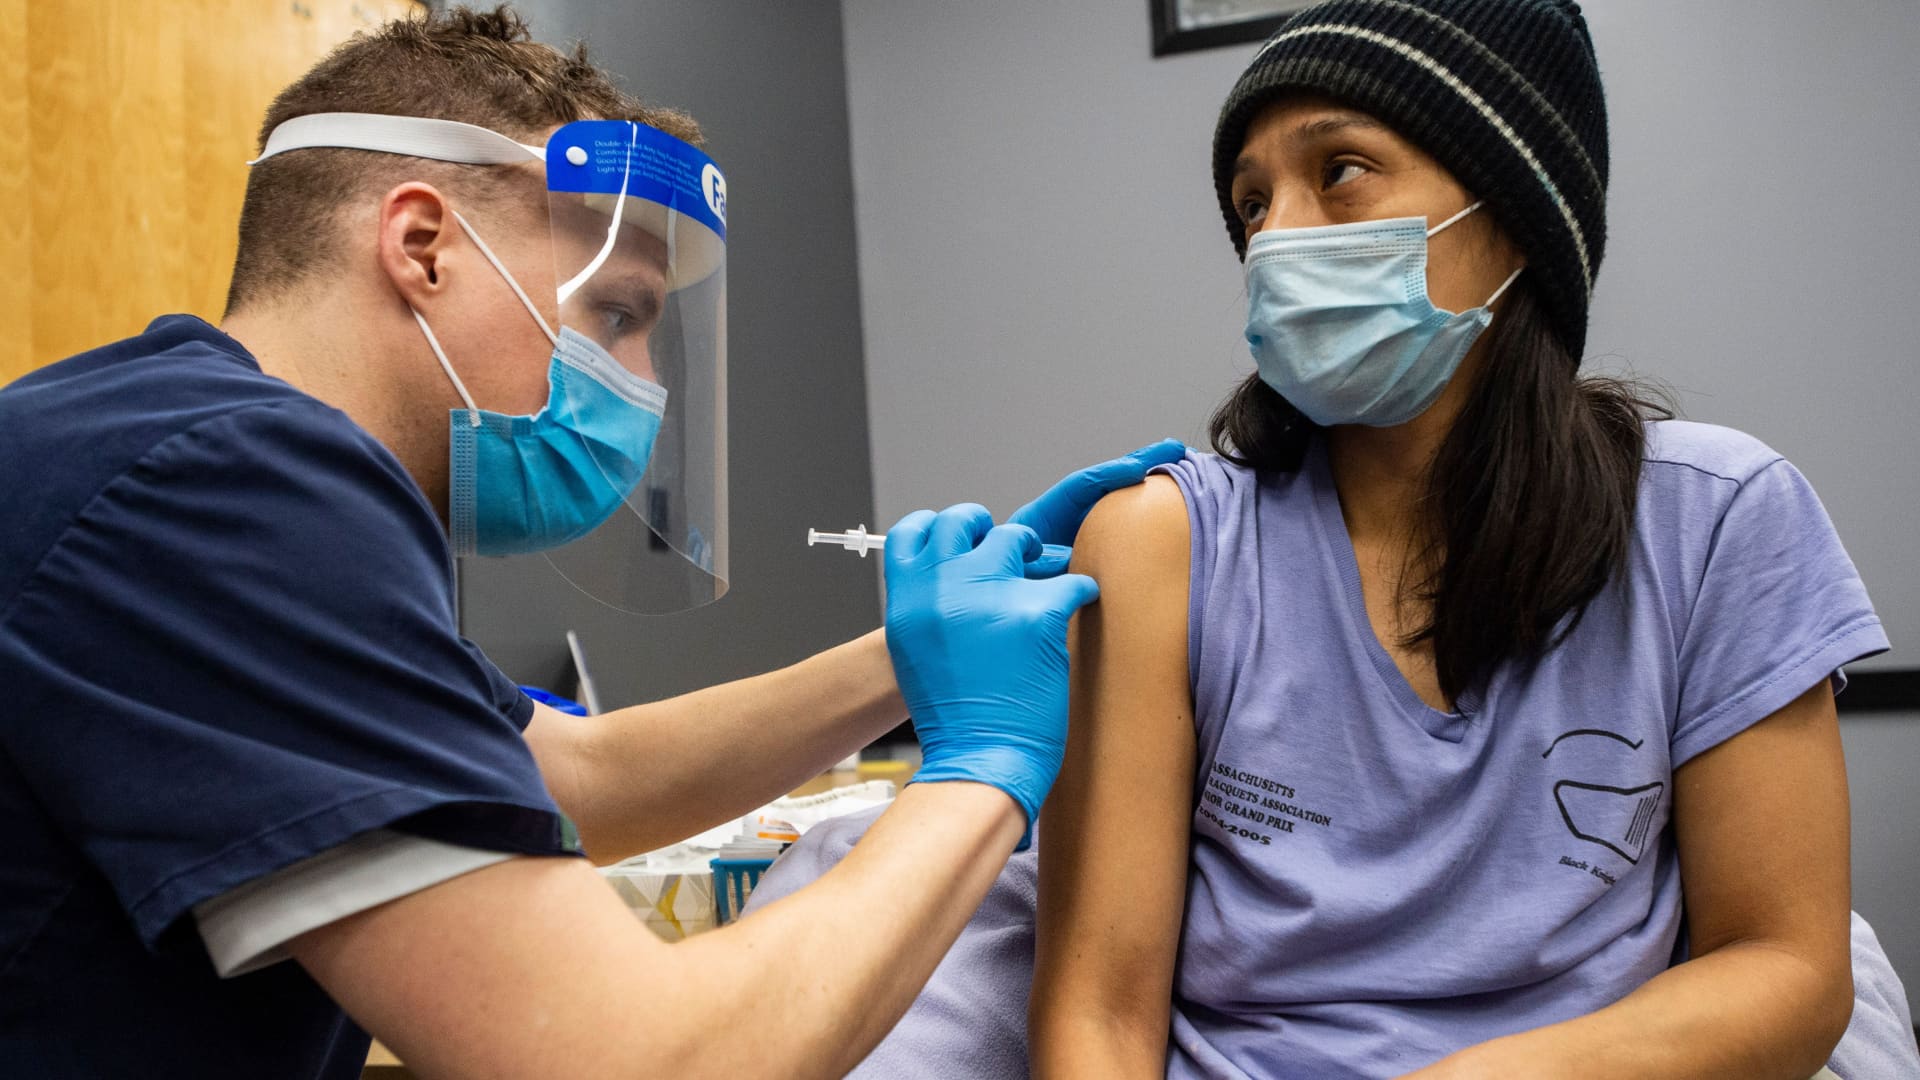 Edith Arangoitia, 46, (who came as a companion to her elderly mother) is vaccinated with the Pfizer-BioNTech Covid-19 vaccine by Doctor Galen Harnden at La Colaborativa in Chelsea, Massachusetts on February 16, 2021.